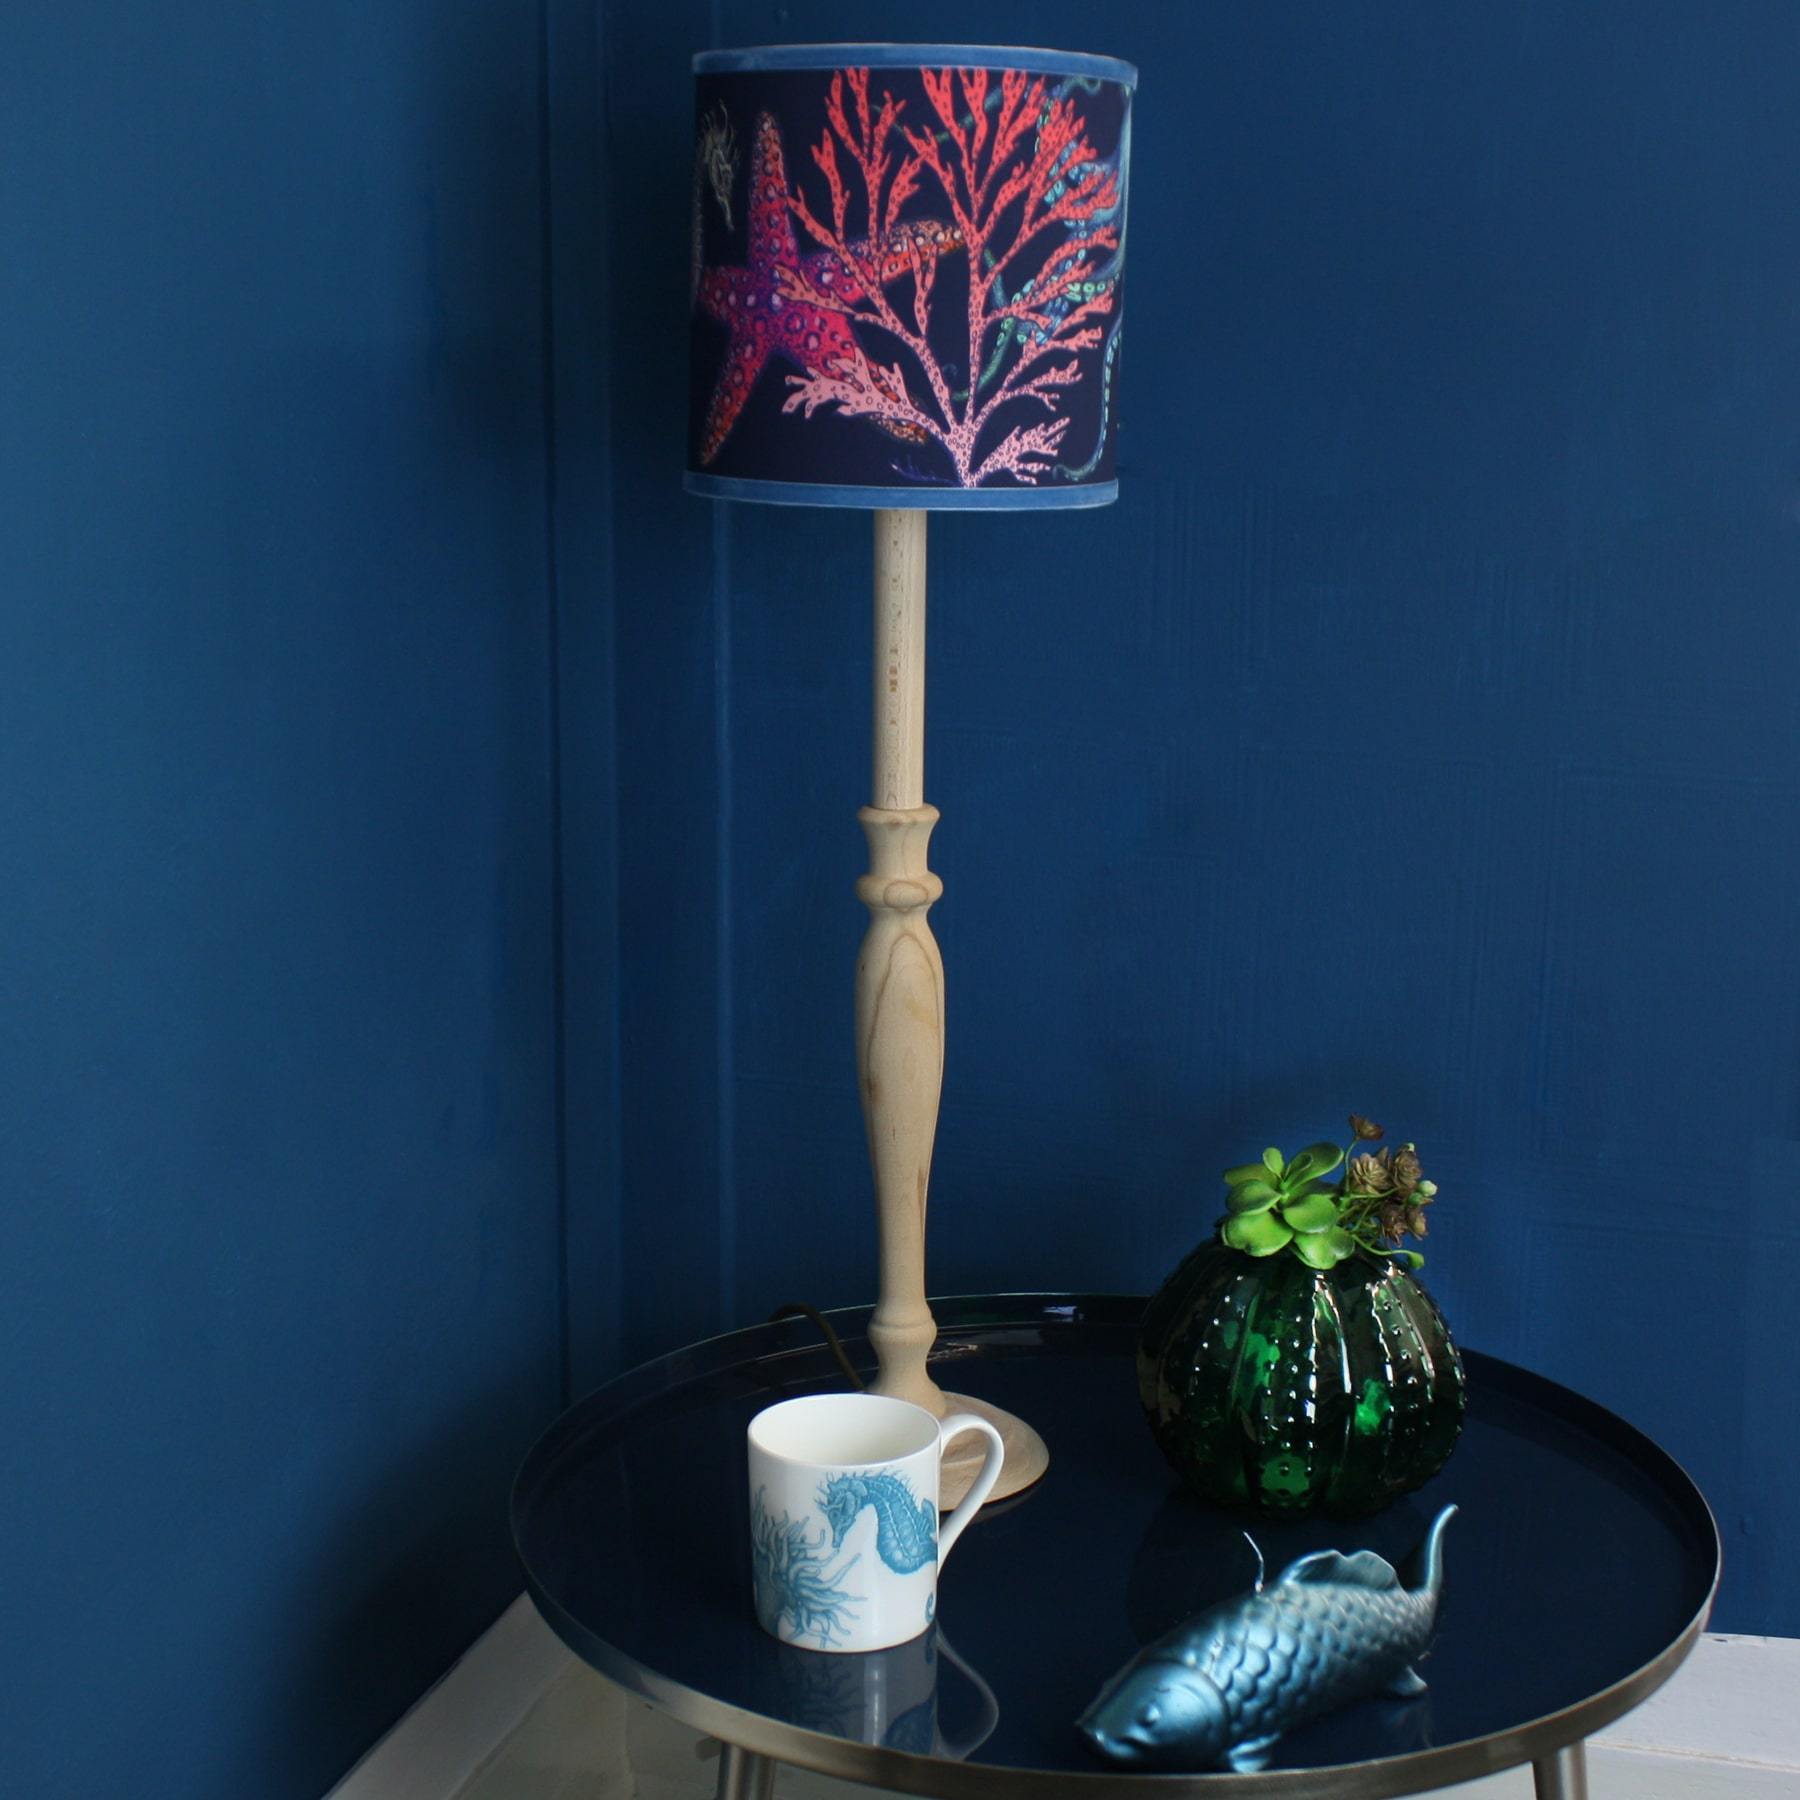 Rainbow Reef Navy Shade With Octopus,Seahorse,Starfish and Seaweed Design in bright colours on a wooden lampbase placed on a table with a fish candle,mug and a vase with flowers.